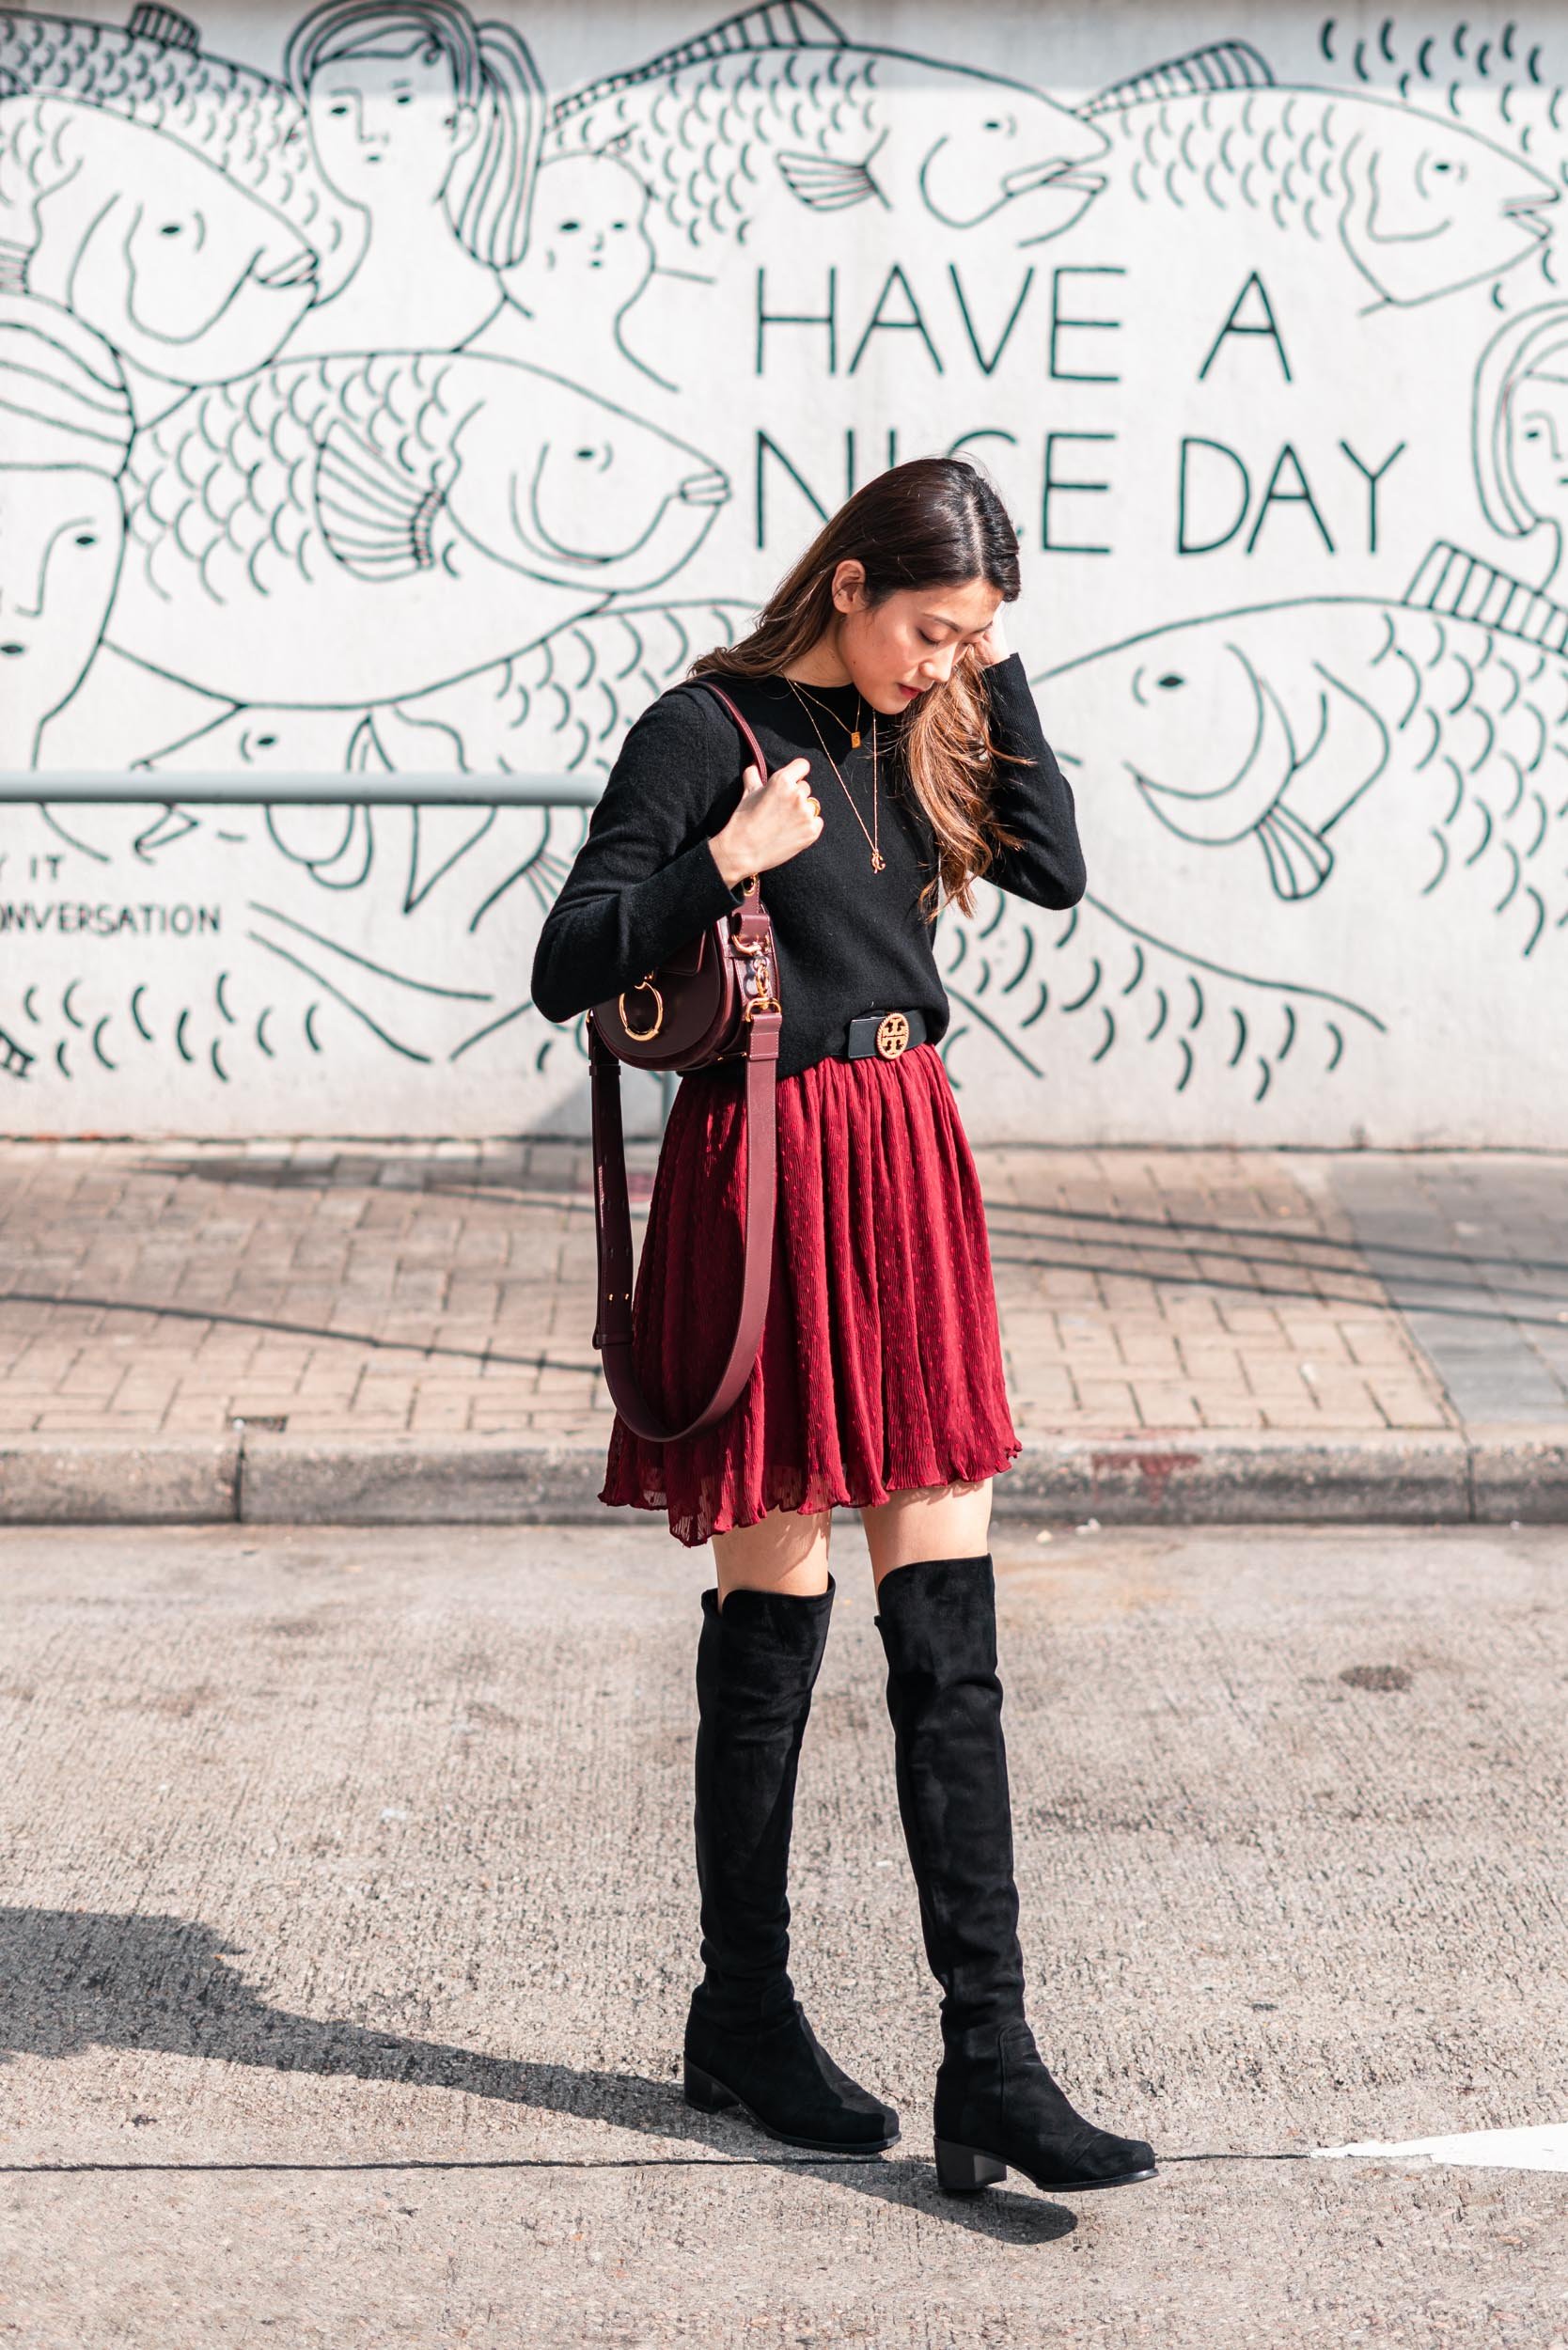 Valentine's Day Outfit Idea: Red Dress + Black Boots.